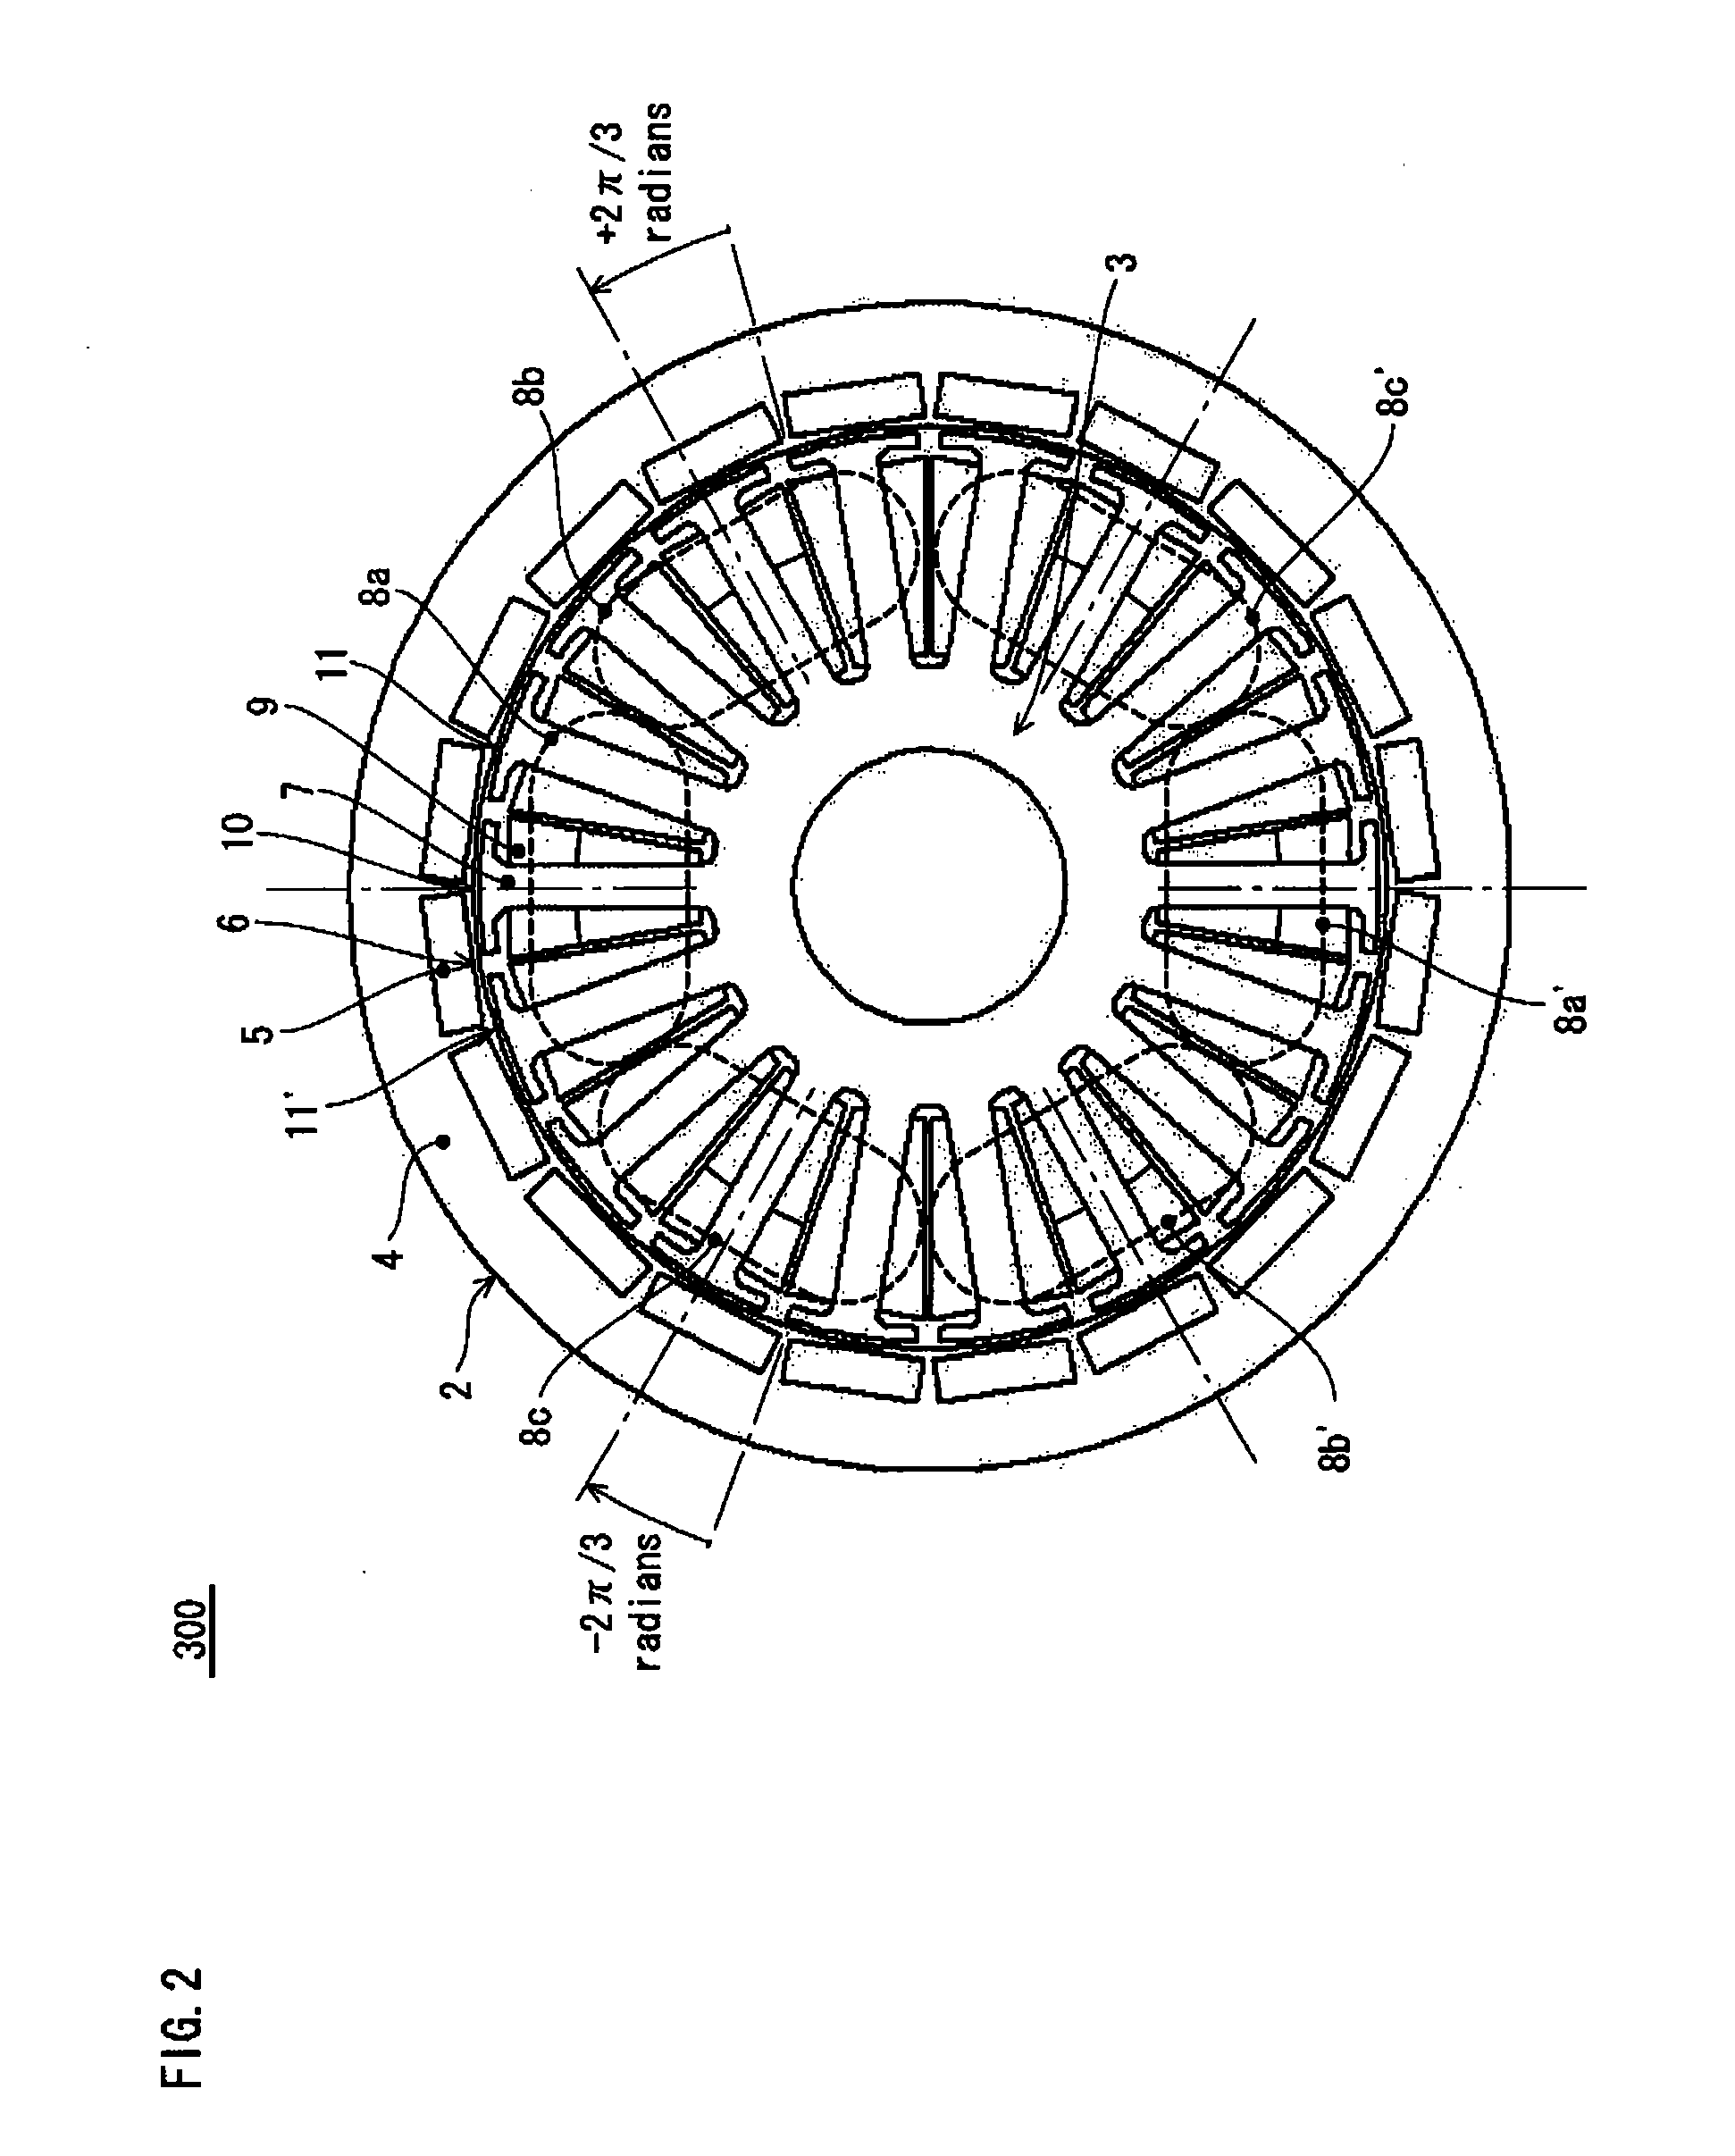 Synchronous electric motor system